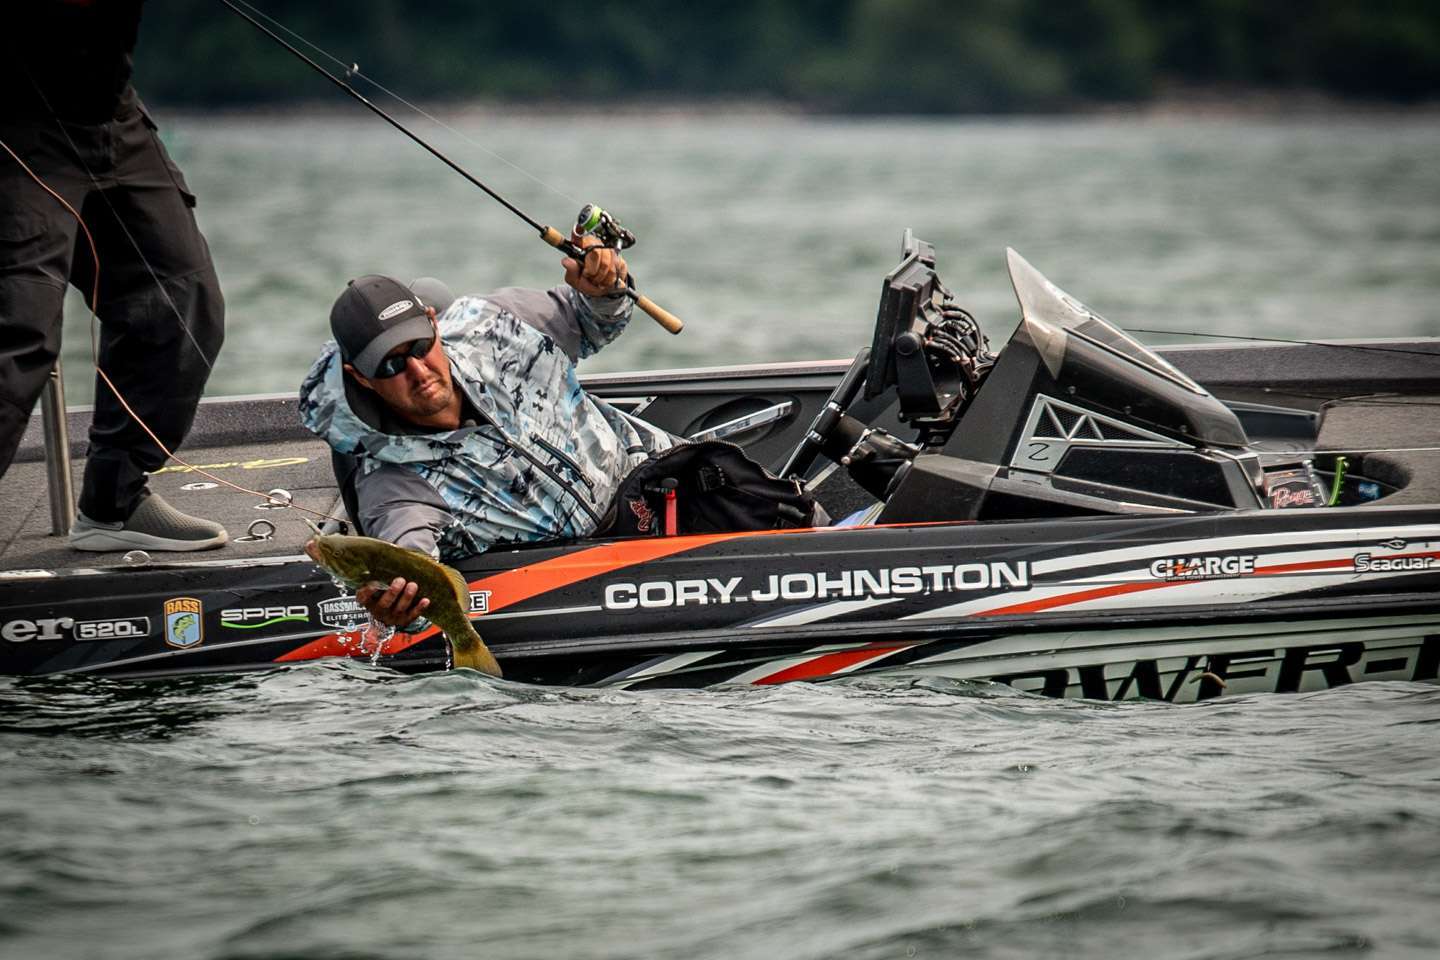 <h4>Cory Johnston</h4>
Cavan, Canada<br>
Qualified via the 2021 Bassmaster Elite Series and winning the 2021 Basspro.com Bassmaster Open at 1000 Islands  <br>
2021 AOY Rank: 5 (664 points)